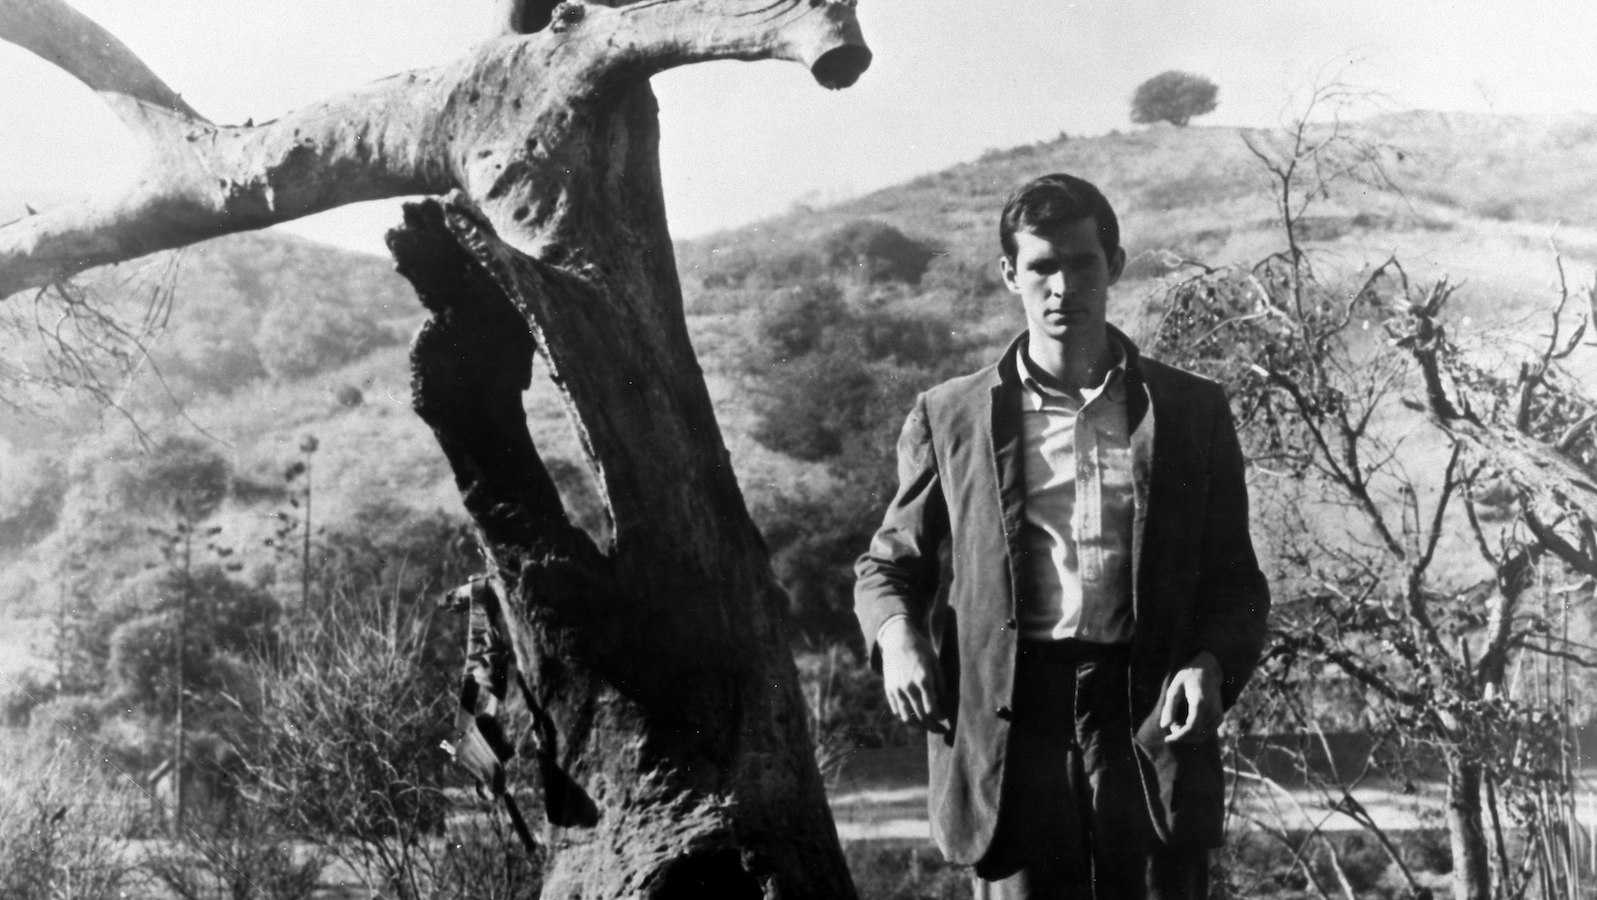 An ominous black and white photo of a man standing next to a gnarled tree looking at camera from a distance, his face partly shadowed